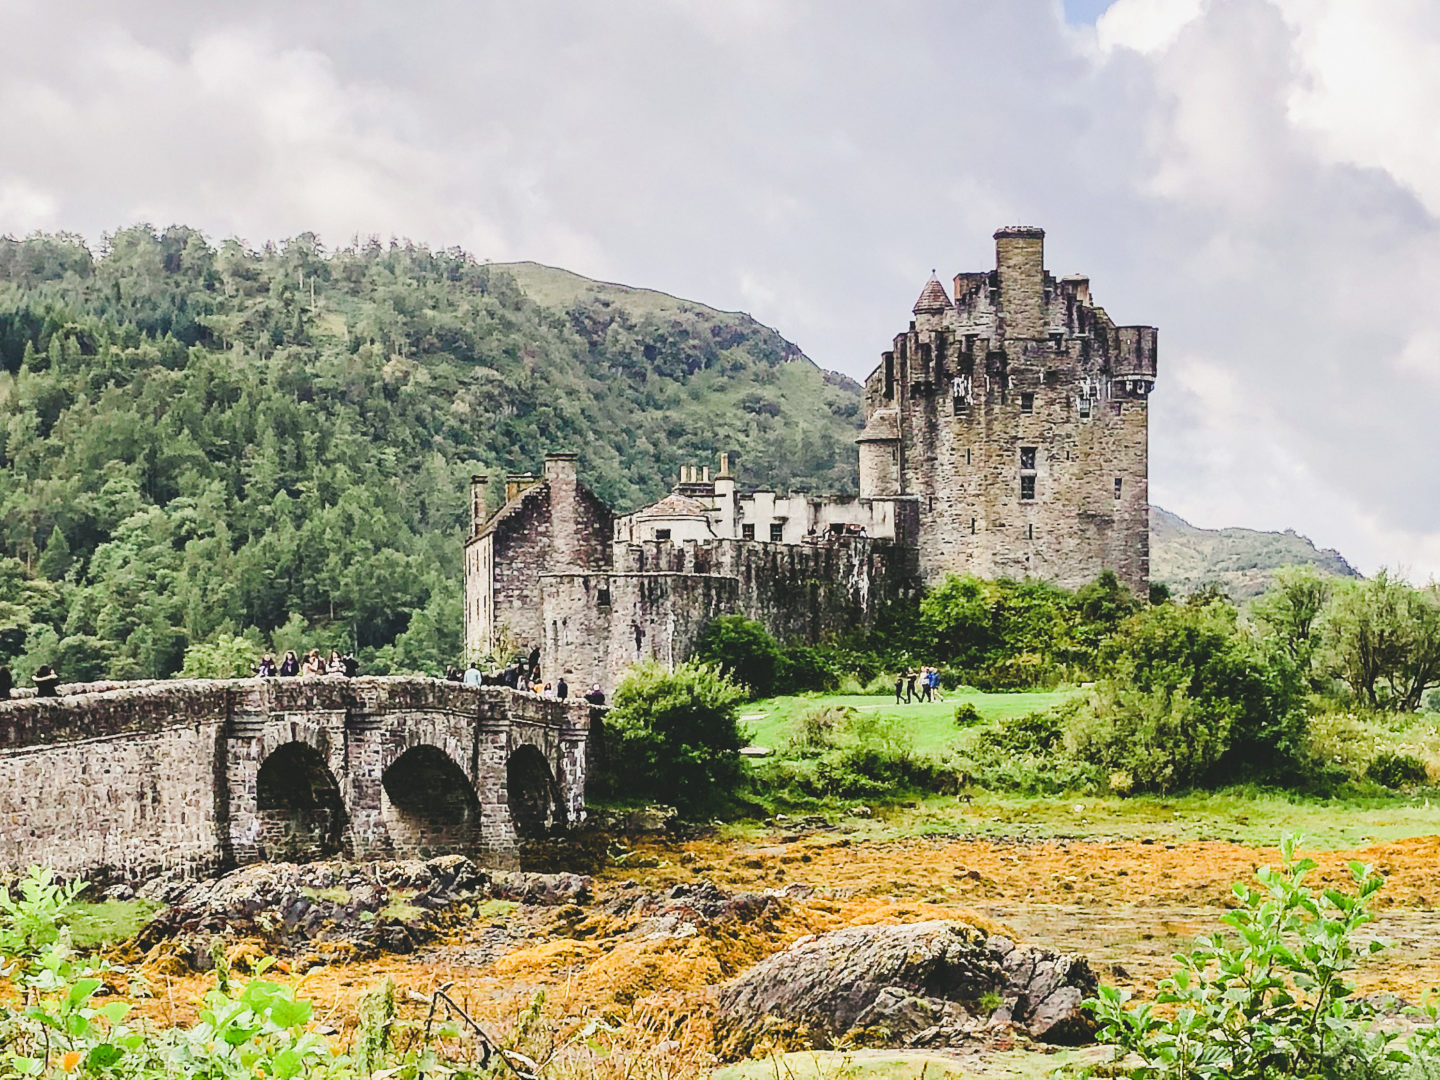 Exterior of Eileen Donan Castle with stone footbridge to left, green covered hills in background to left and mossy green terrain to right in front of the castle